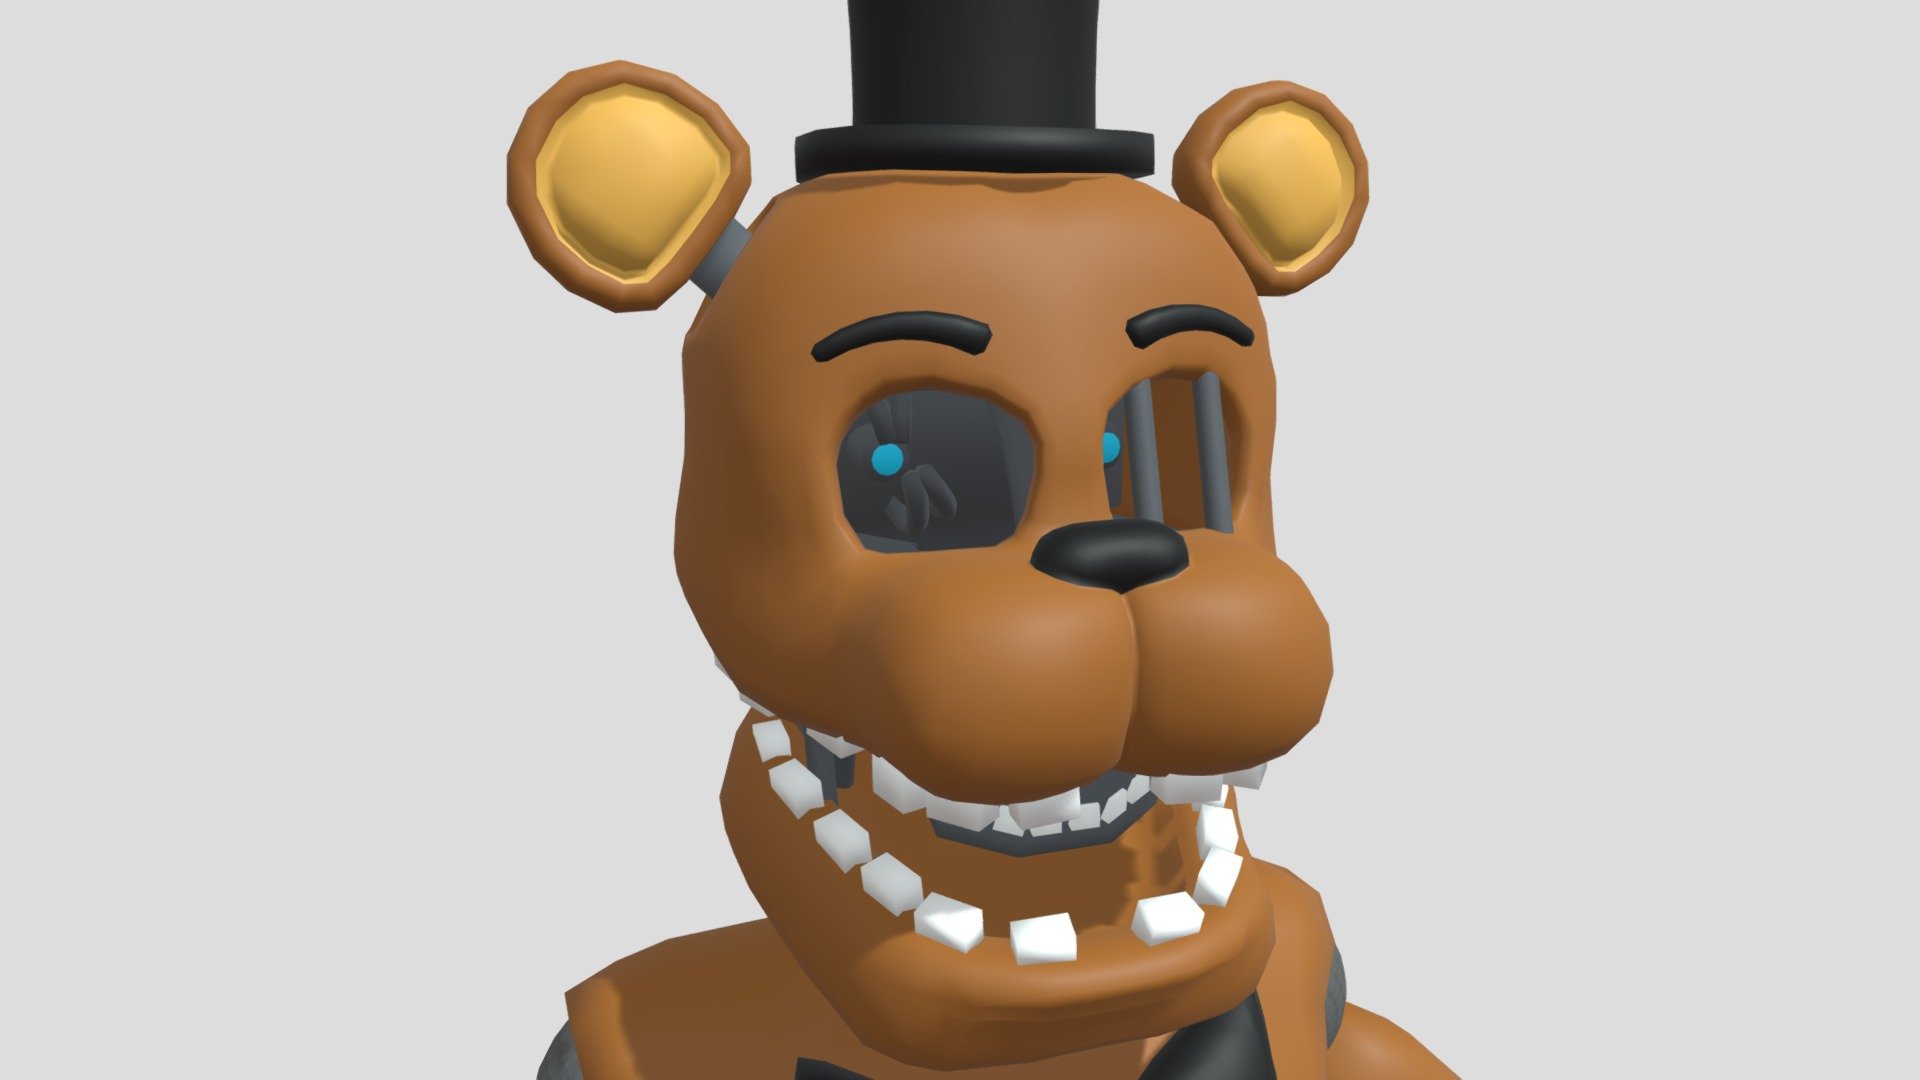 Kawaii Withered Freddy - Five Nights At Freddy's - Free